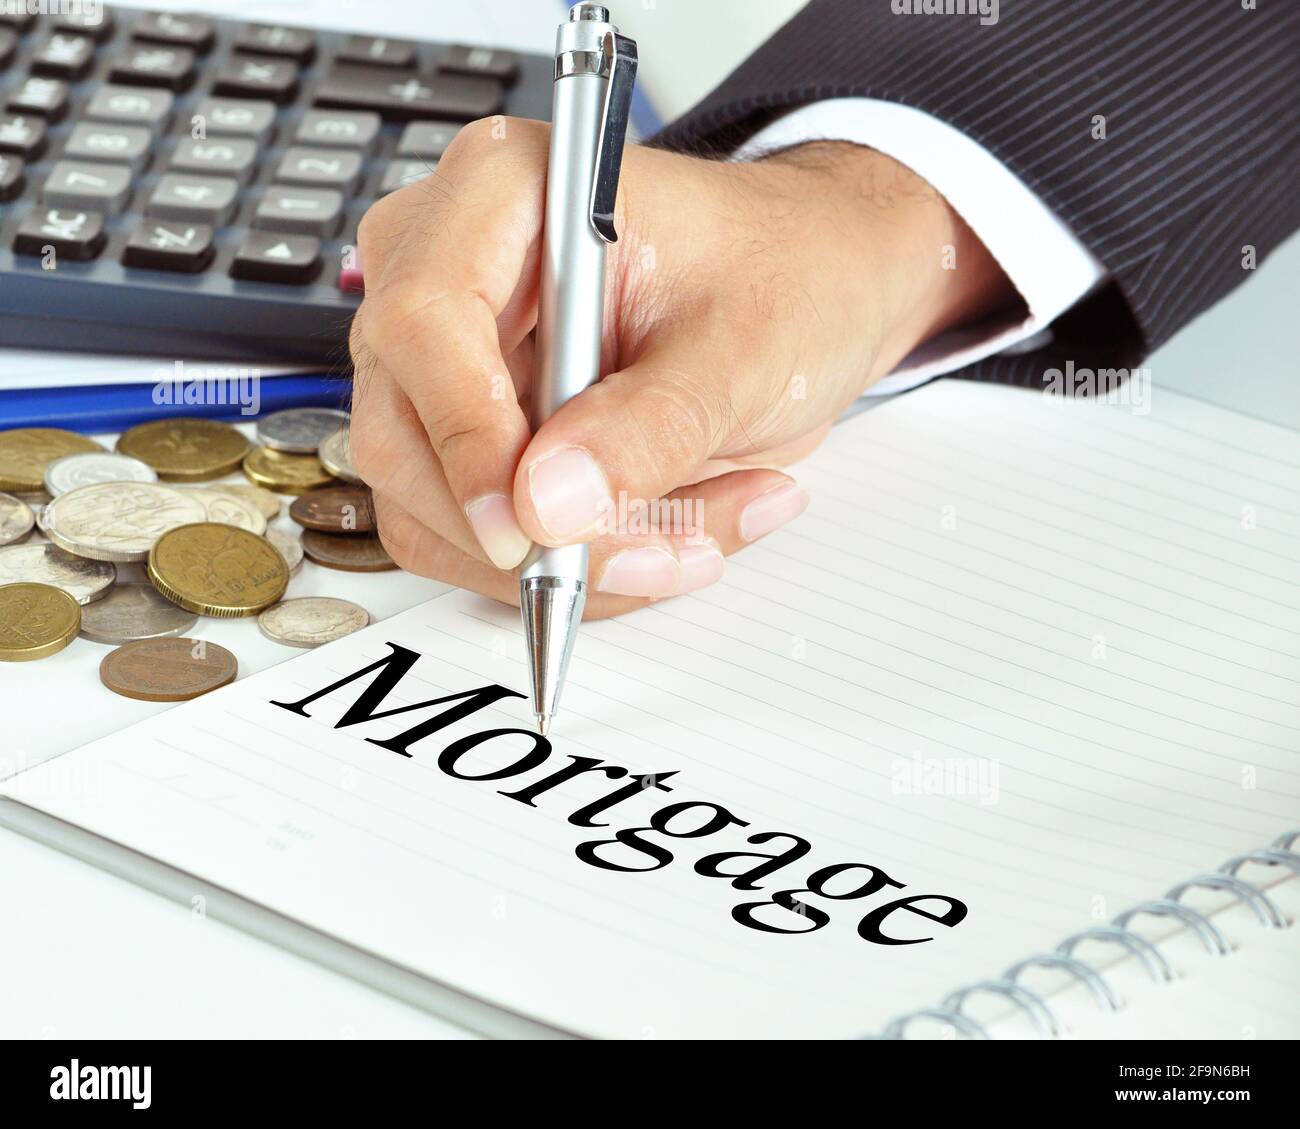 Hand with pen pointing to Mortgage word on the paper - financial & business concept Stock Photo